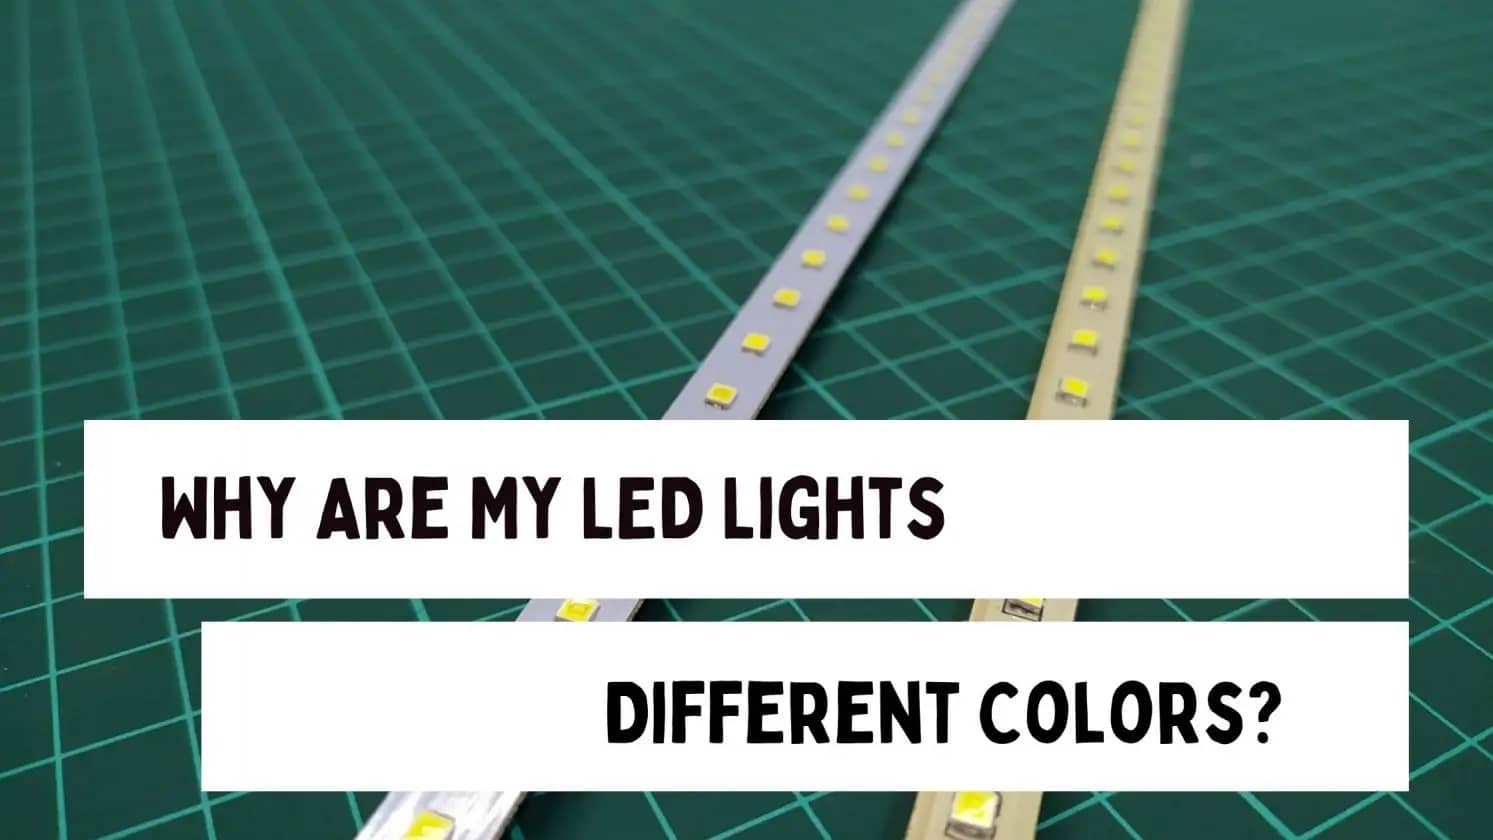 Why Are My LED Lights Different Colors?